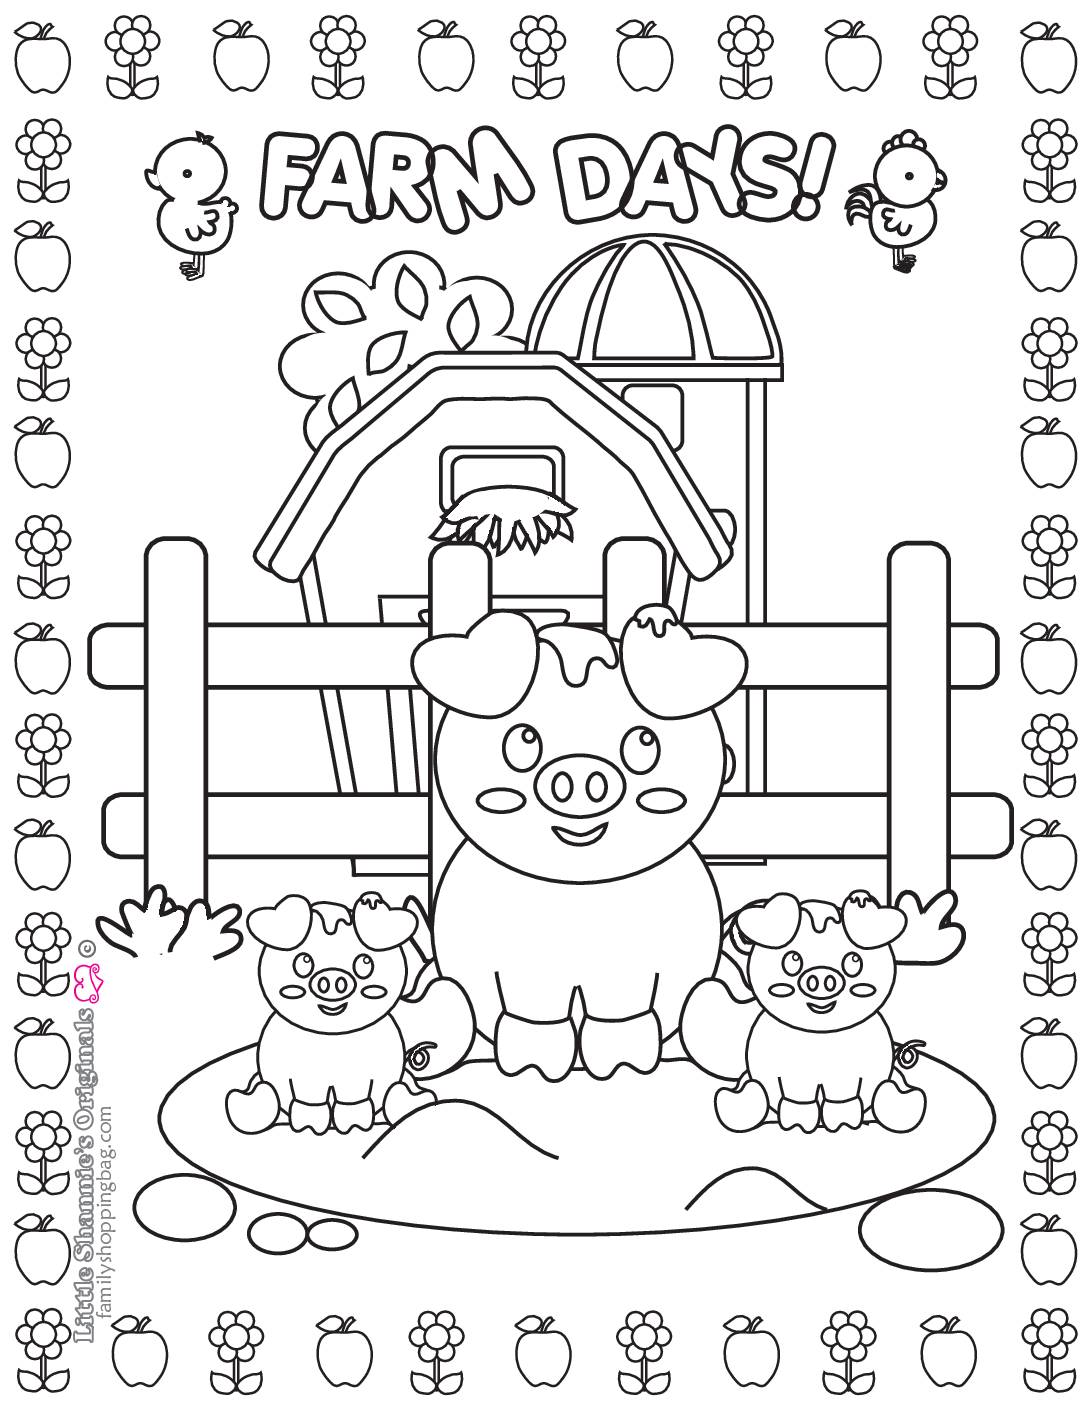 Coloring Page 6 Farm Coloring Pages